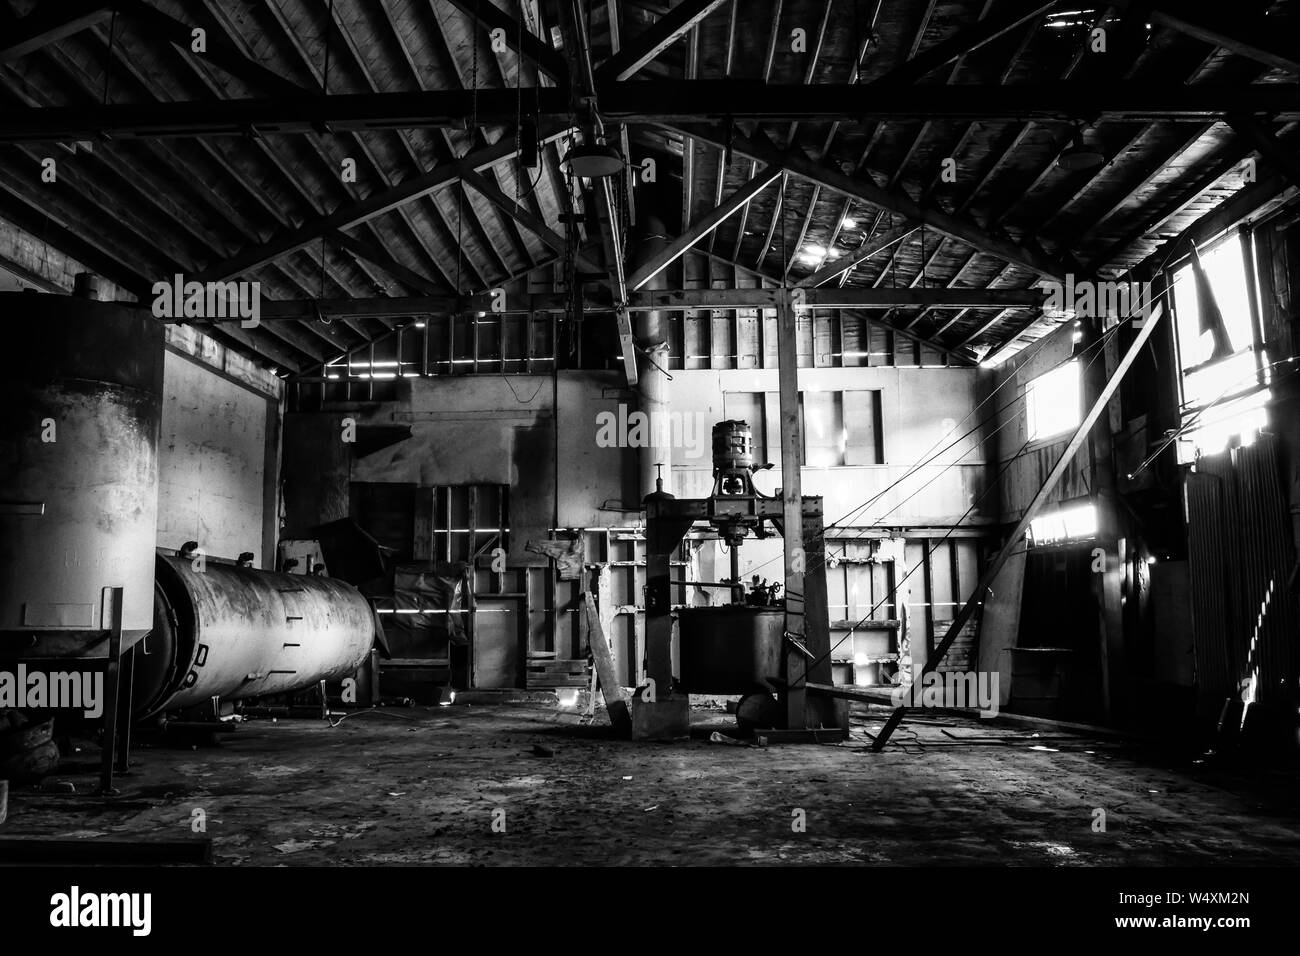 Black and white dramatic interior abandoned cannery warehouse building.  Old equipment and crumbling walls in rustic grungy historic building. Stock Photo